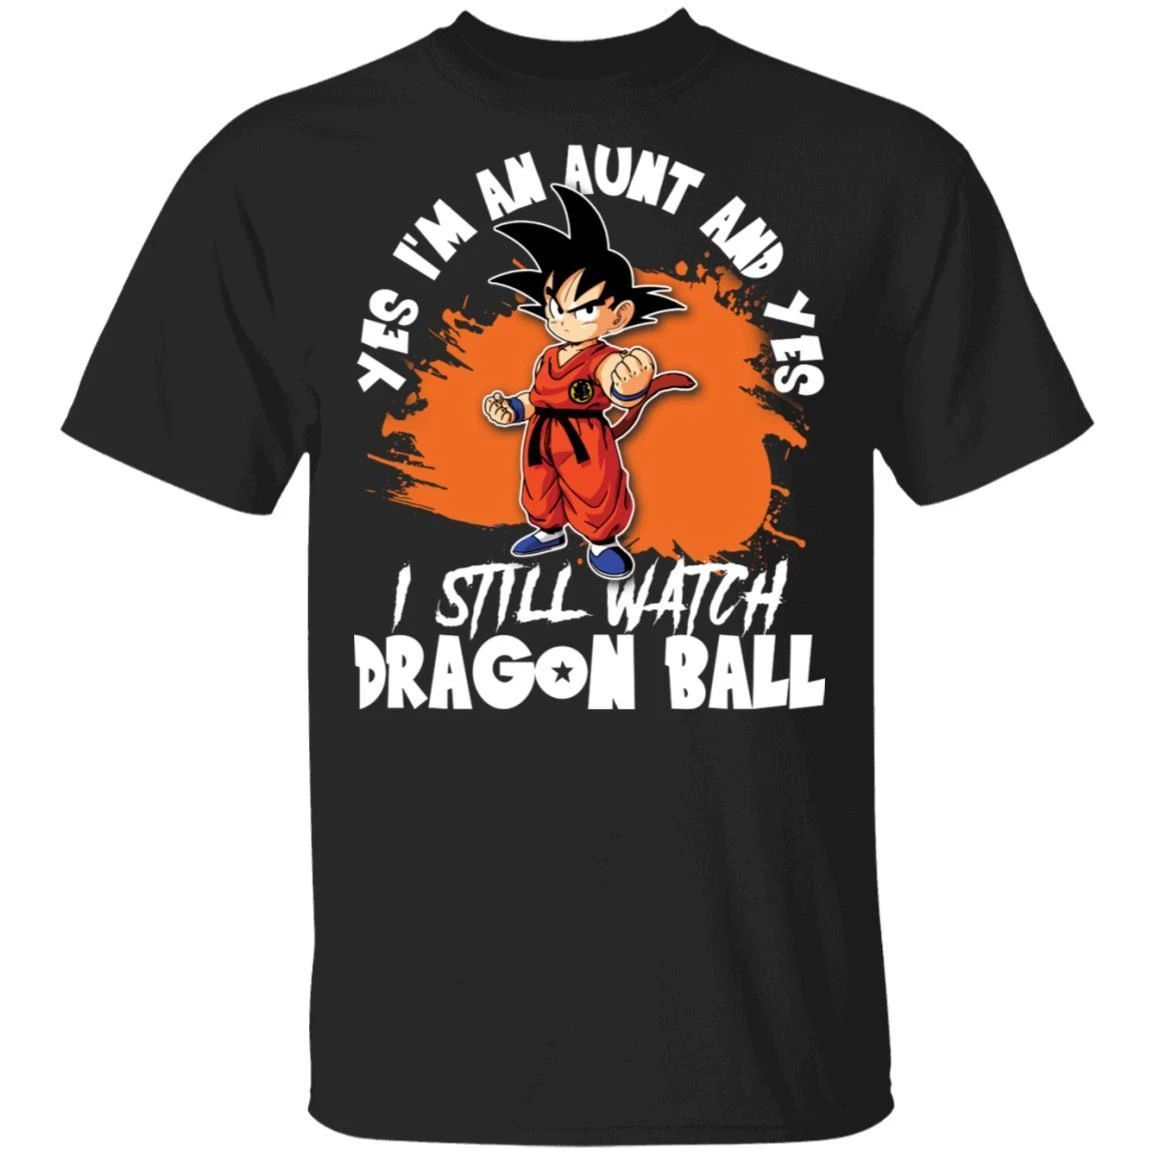 Yes I’m An Aunt And Yes I Still Watch Dragon Ball Shirt Son Goku Tee